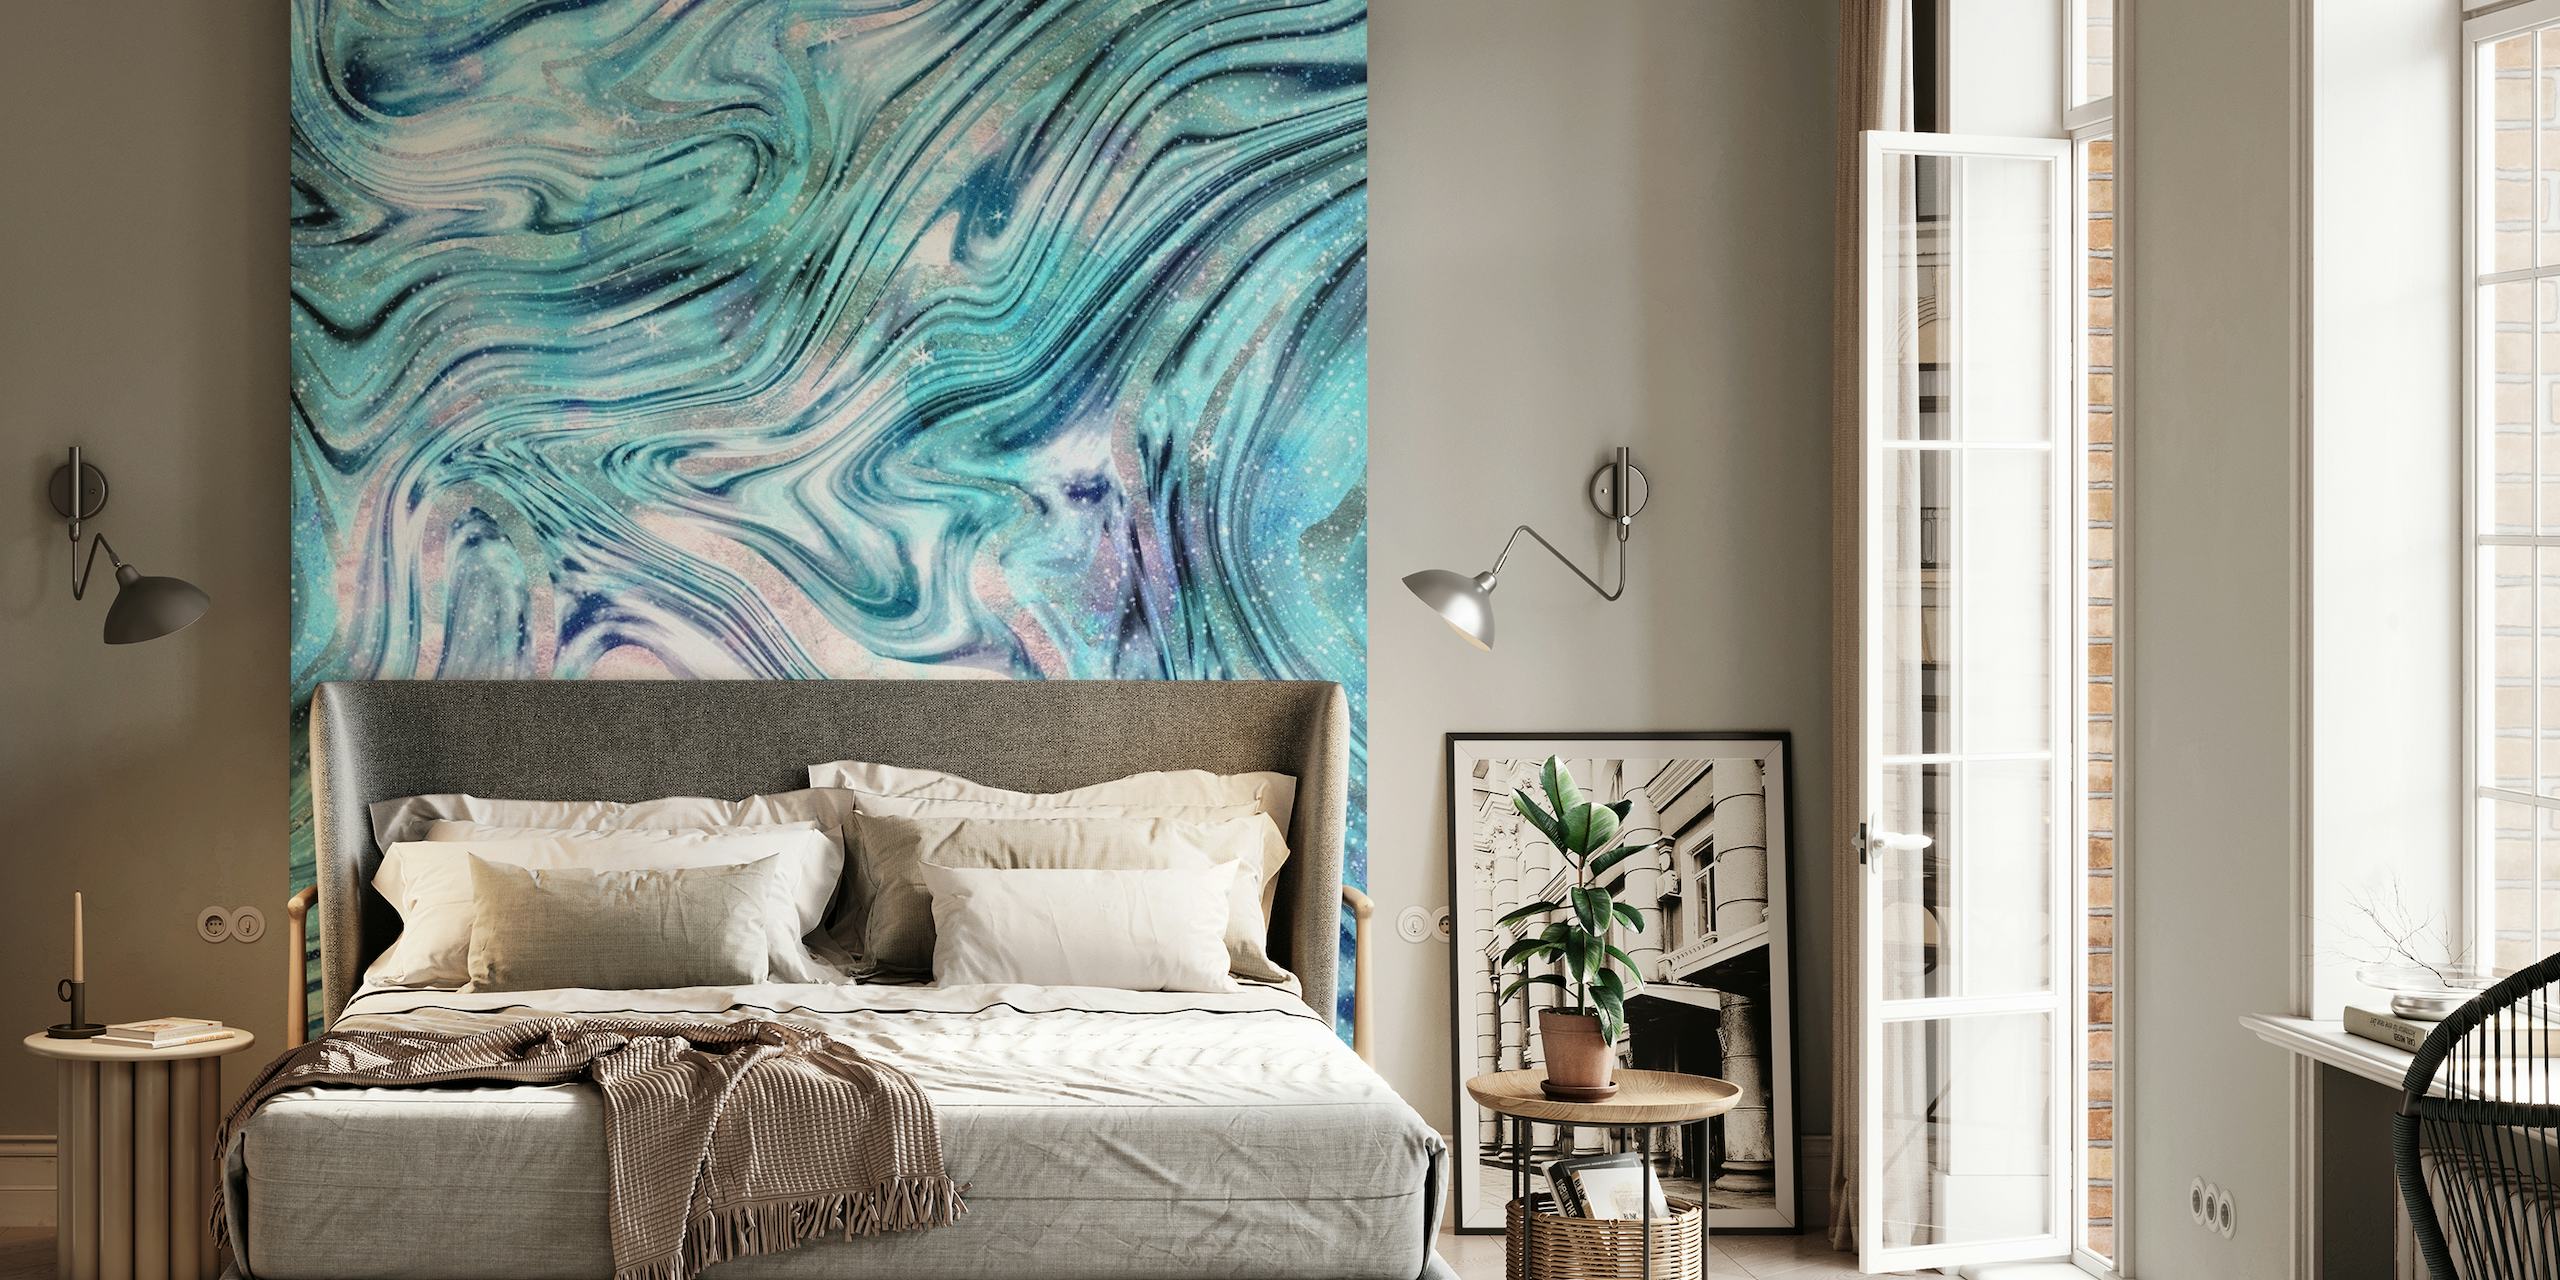 Bohemian Unicorn Marble 2 wall mural with pastel blue and pink swirls